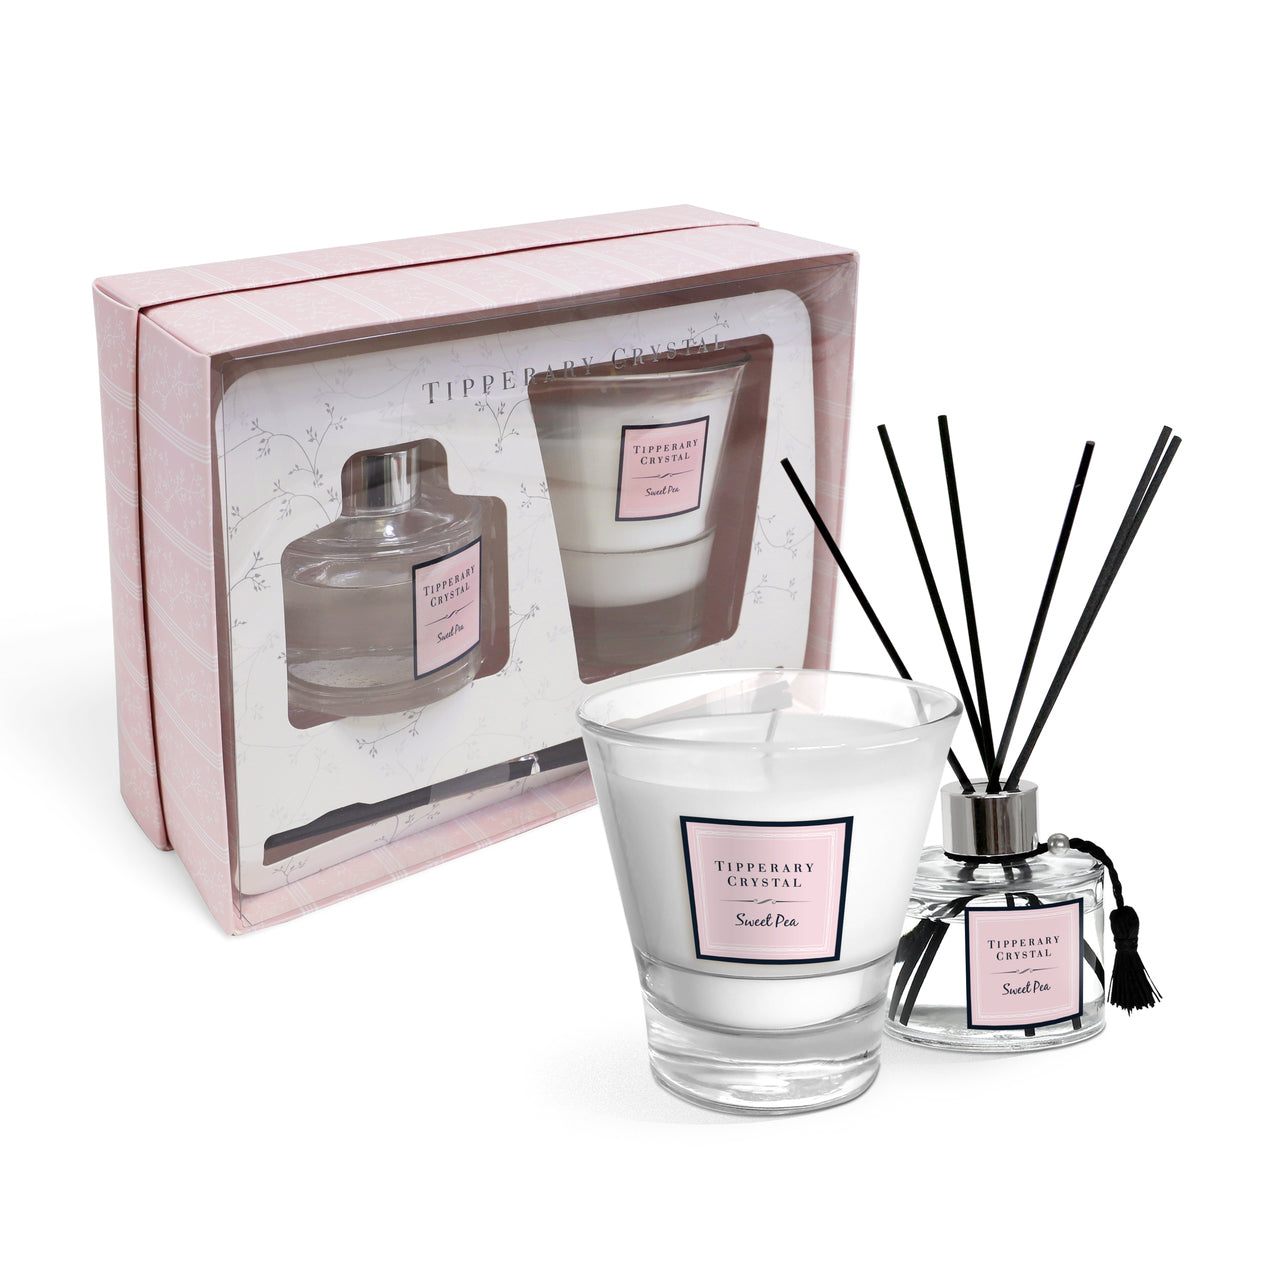 Tipperary Crystal Sweet Pea Candle & Diffuser Gift Set NEW 2021